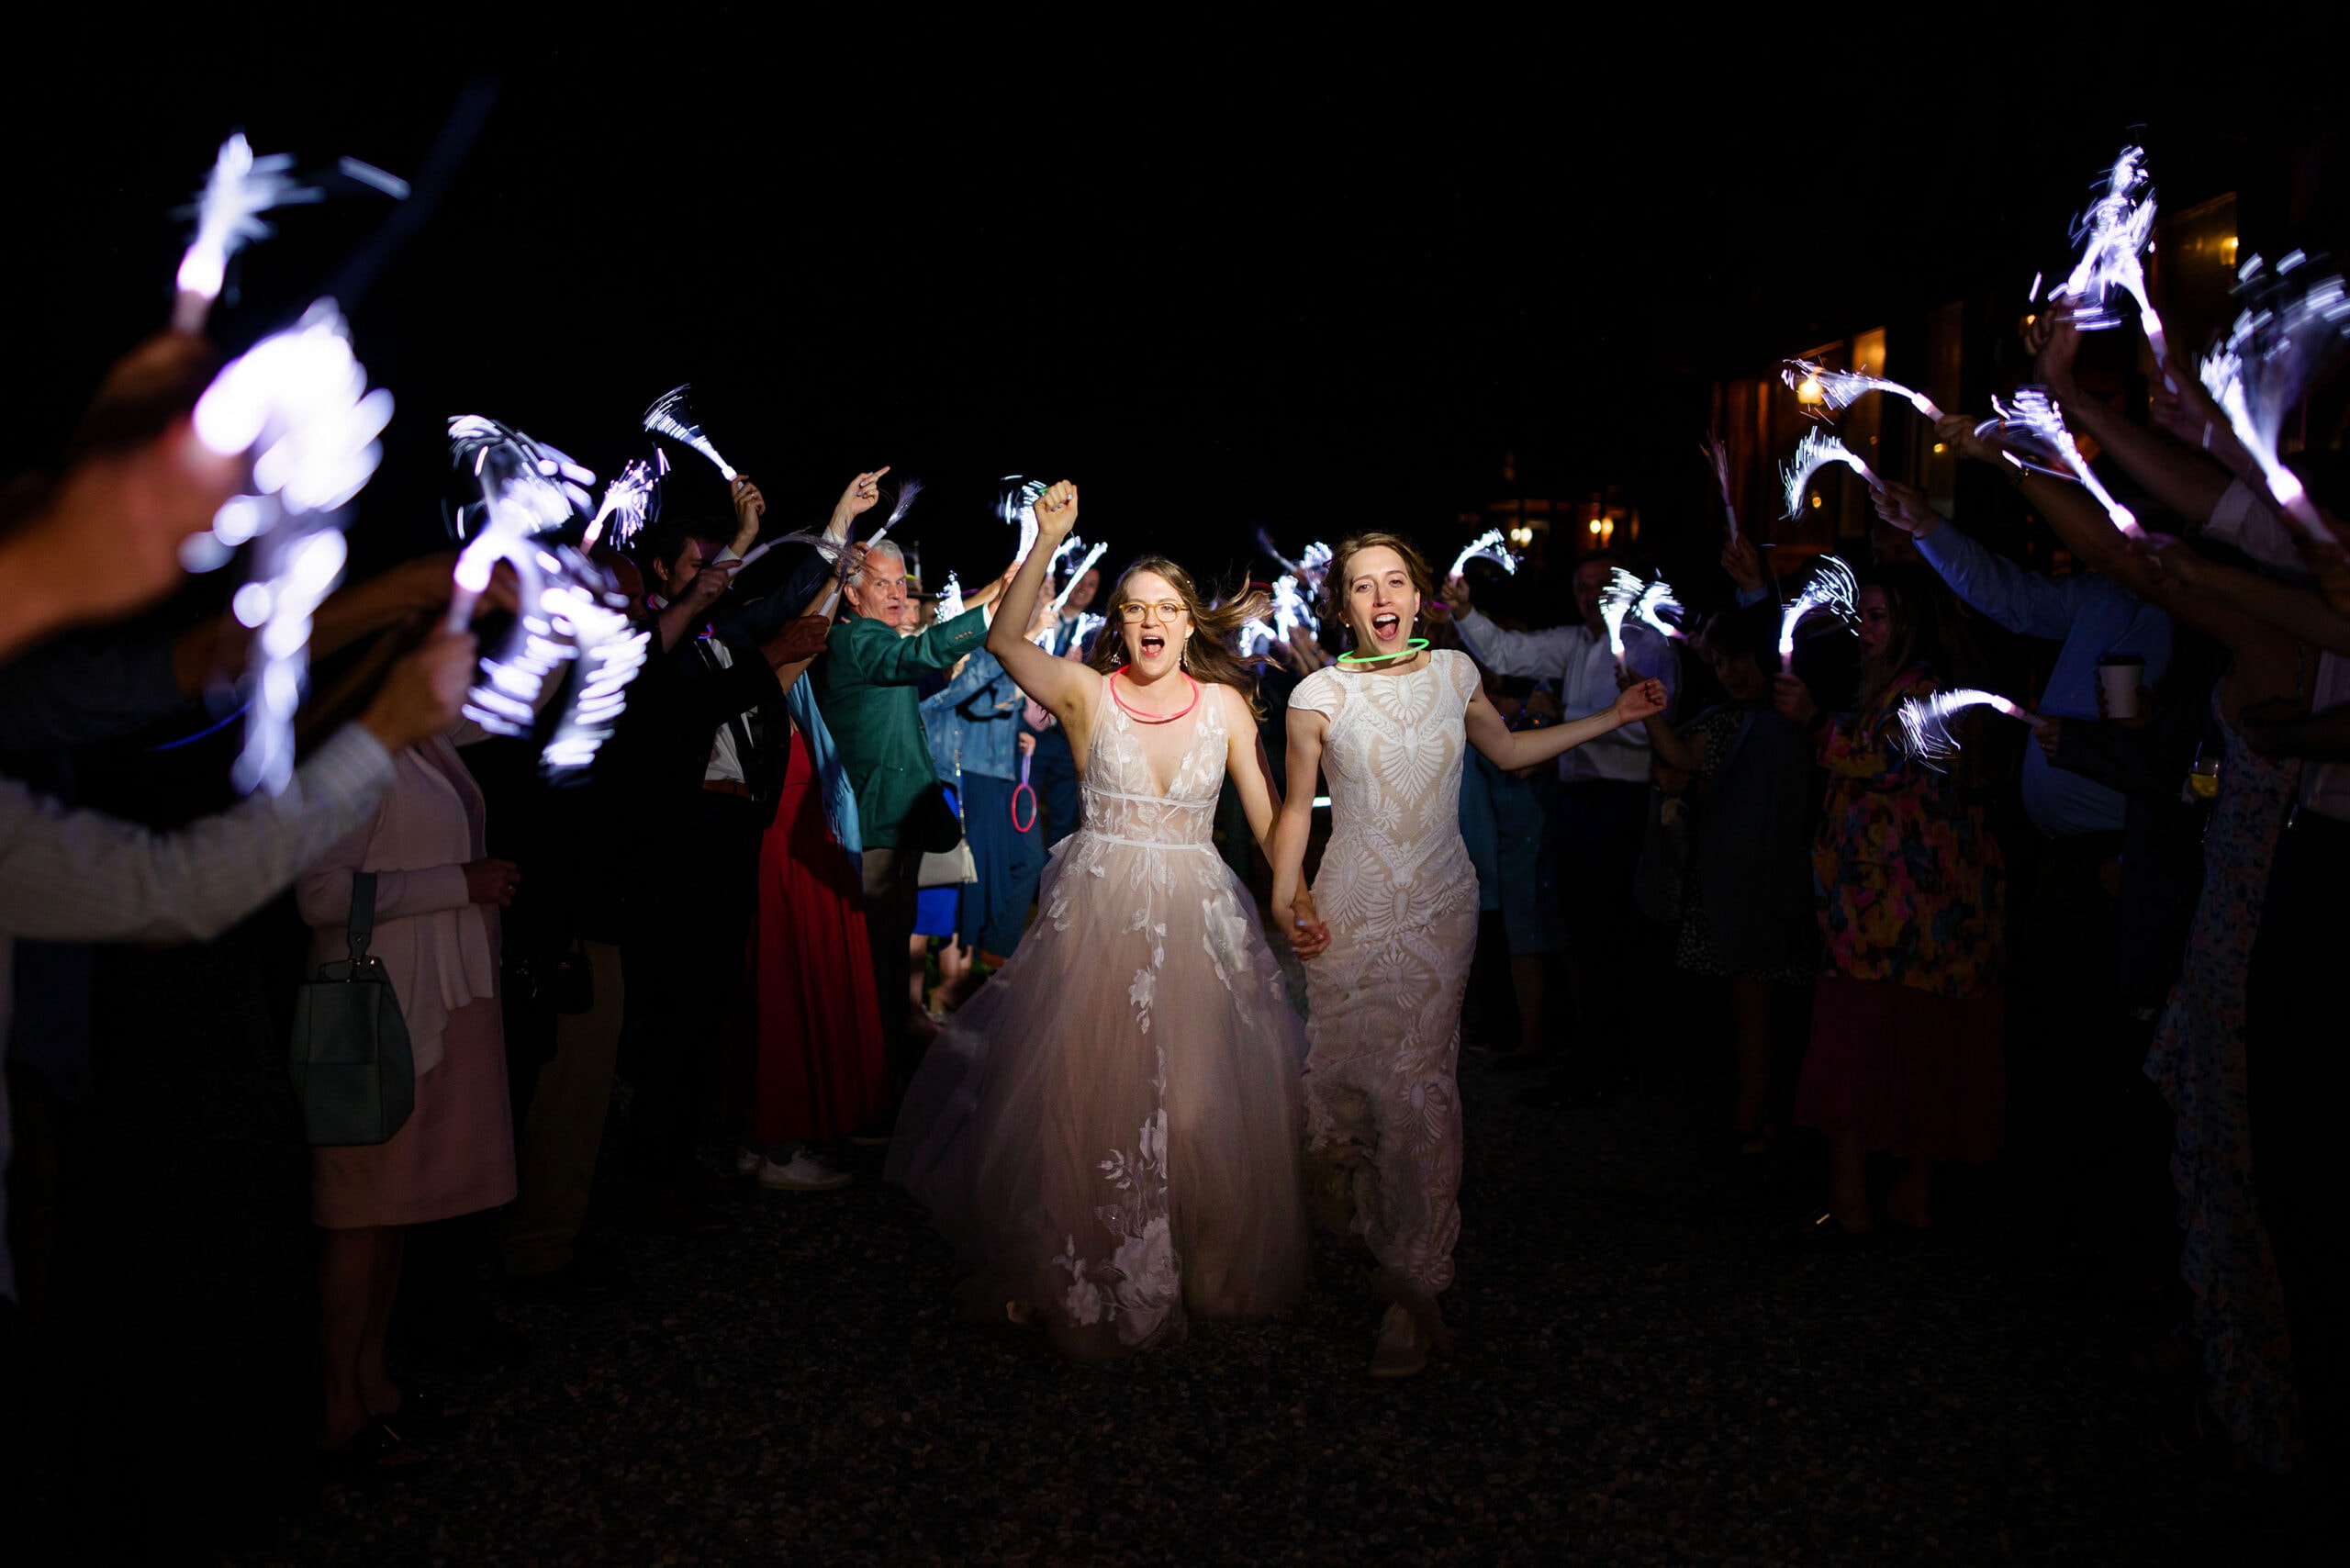 Miranda and Alice exit their wedding reception as guests wave fiber optic wands